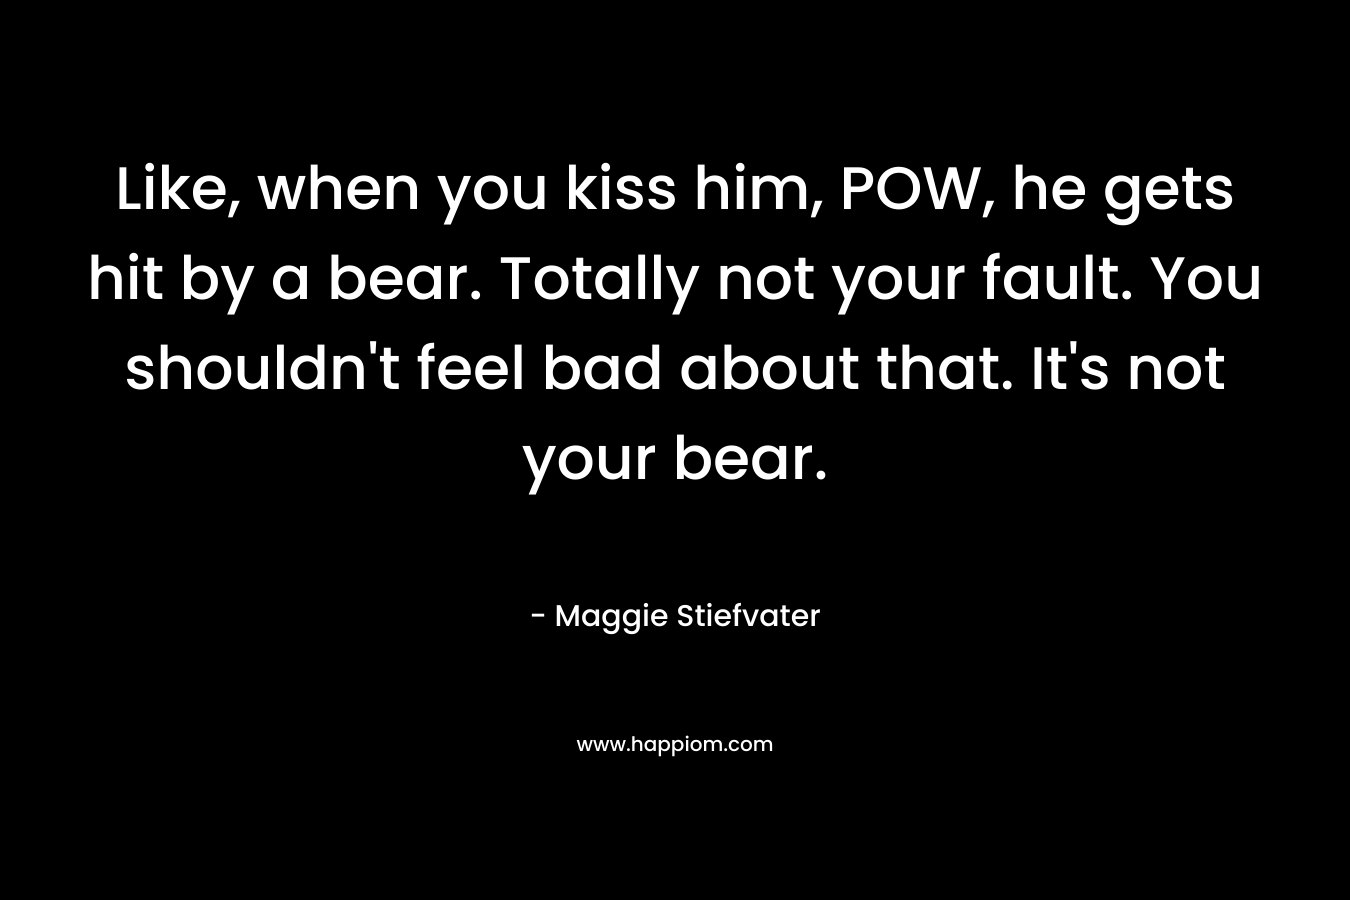 Like, when you kiss him, POW, he gets hit by a bear. Totally not your fault. You shouldn’t feel bad about that. It’s not your bear. – Maggie Stiefvater